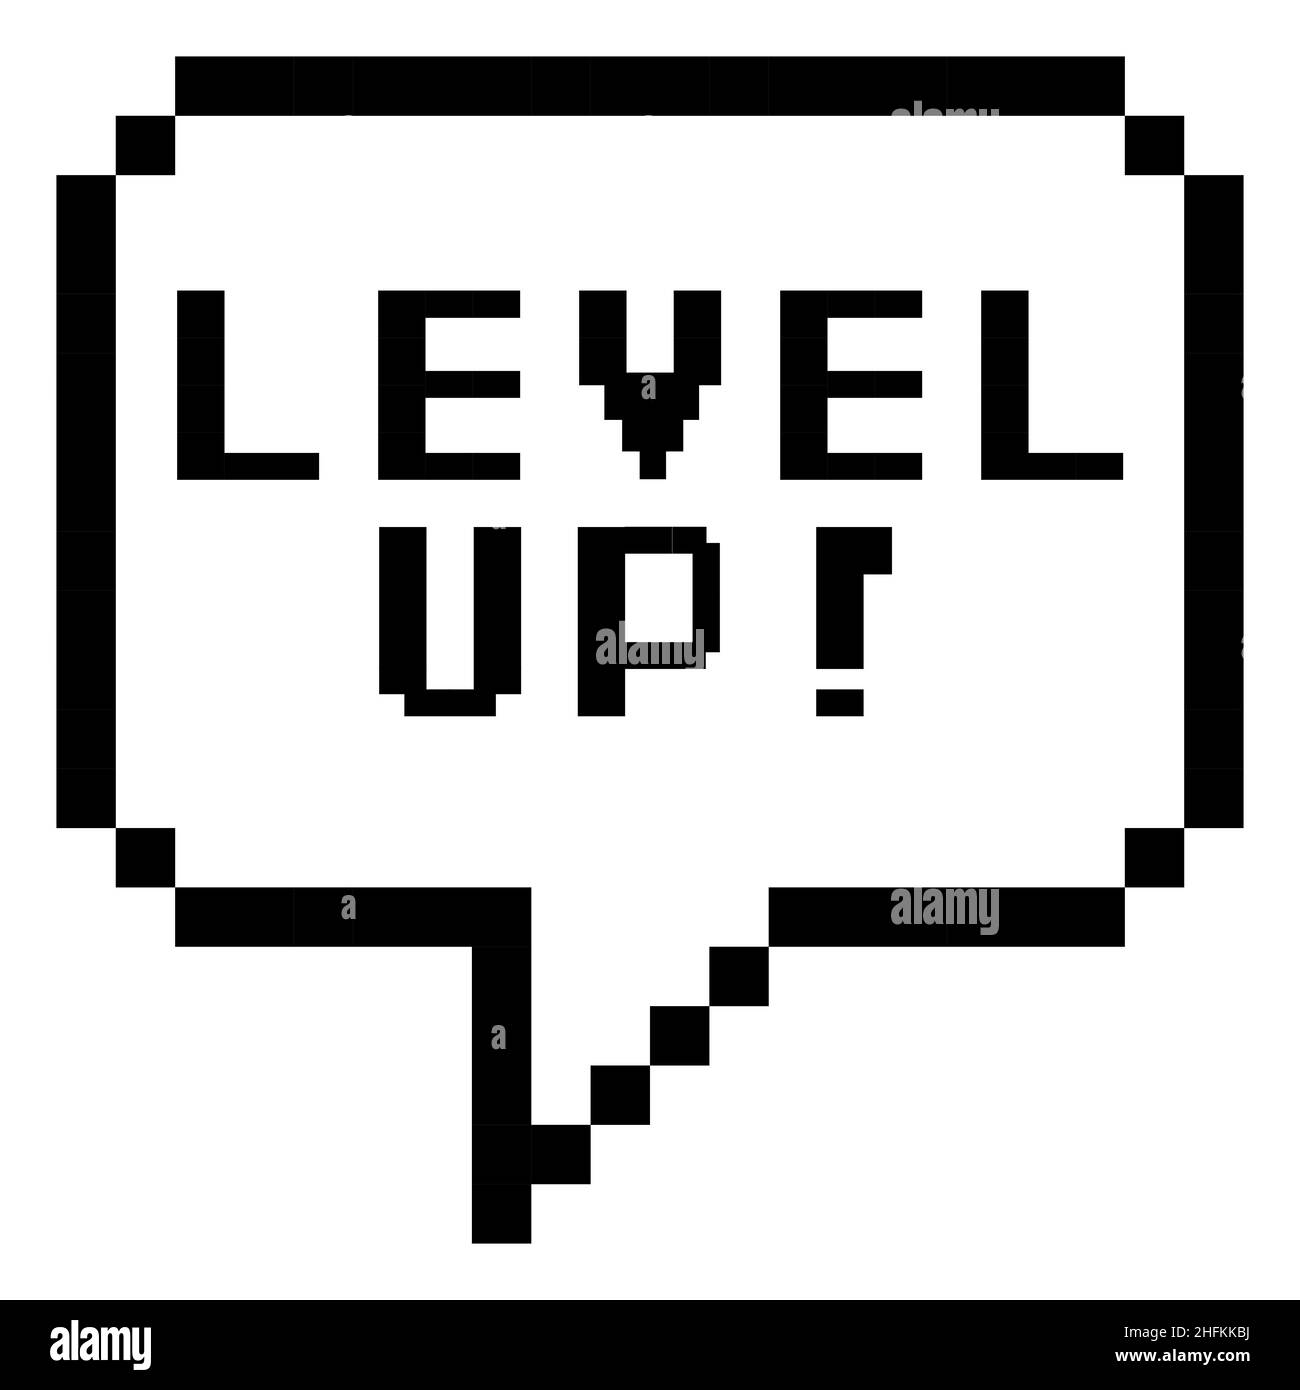 Design of level up icon Stock Vector